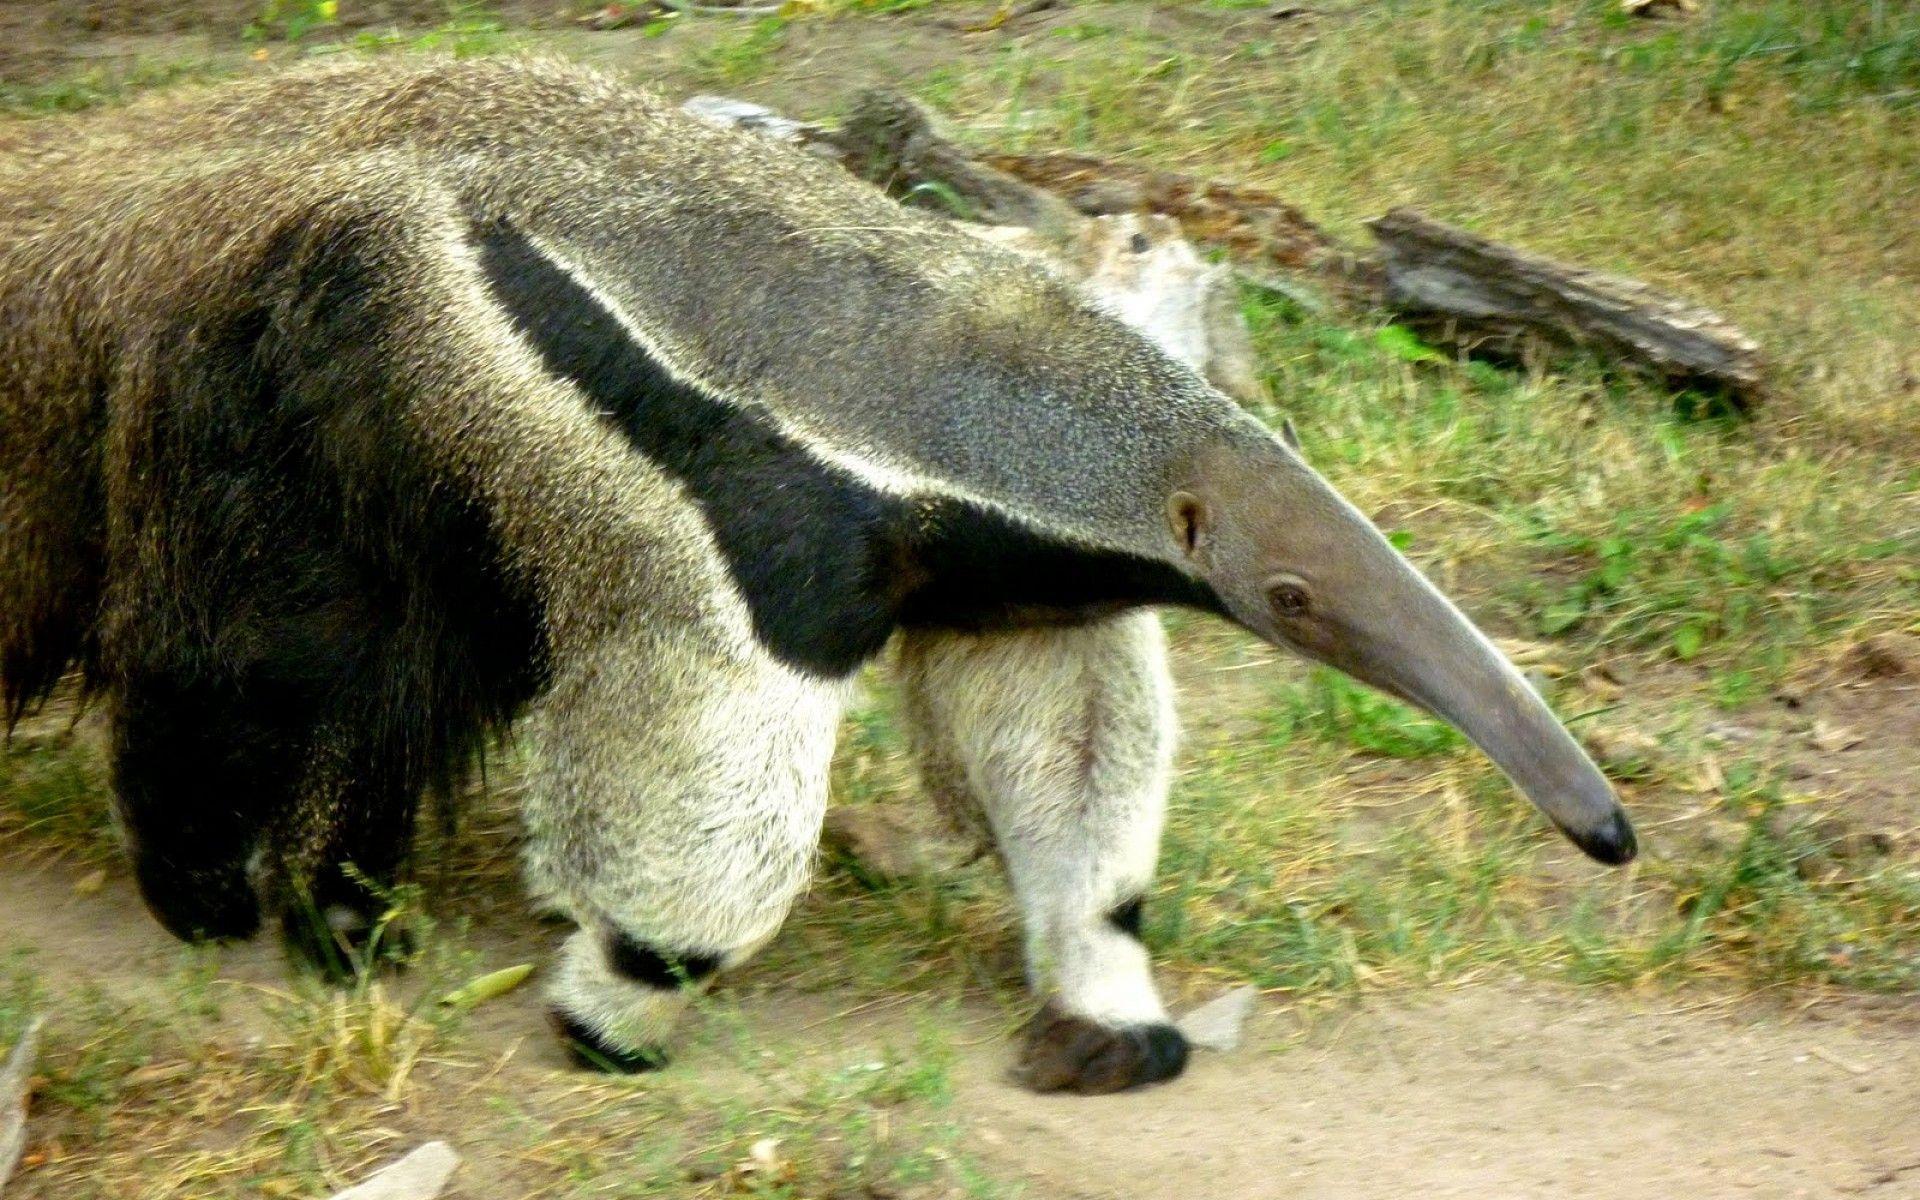 Anteater Wallpapers - Wallpaper Cave1920 x 1200